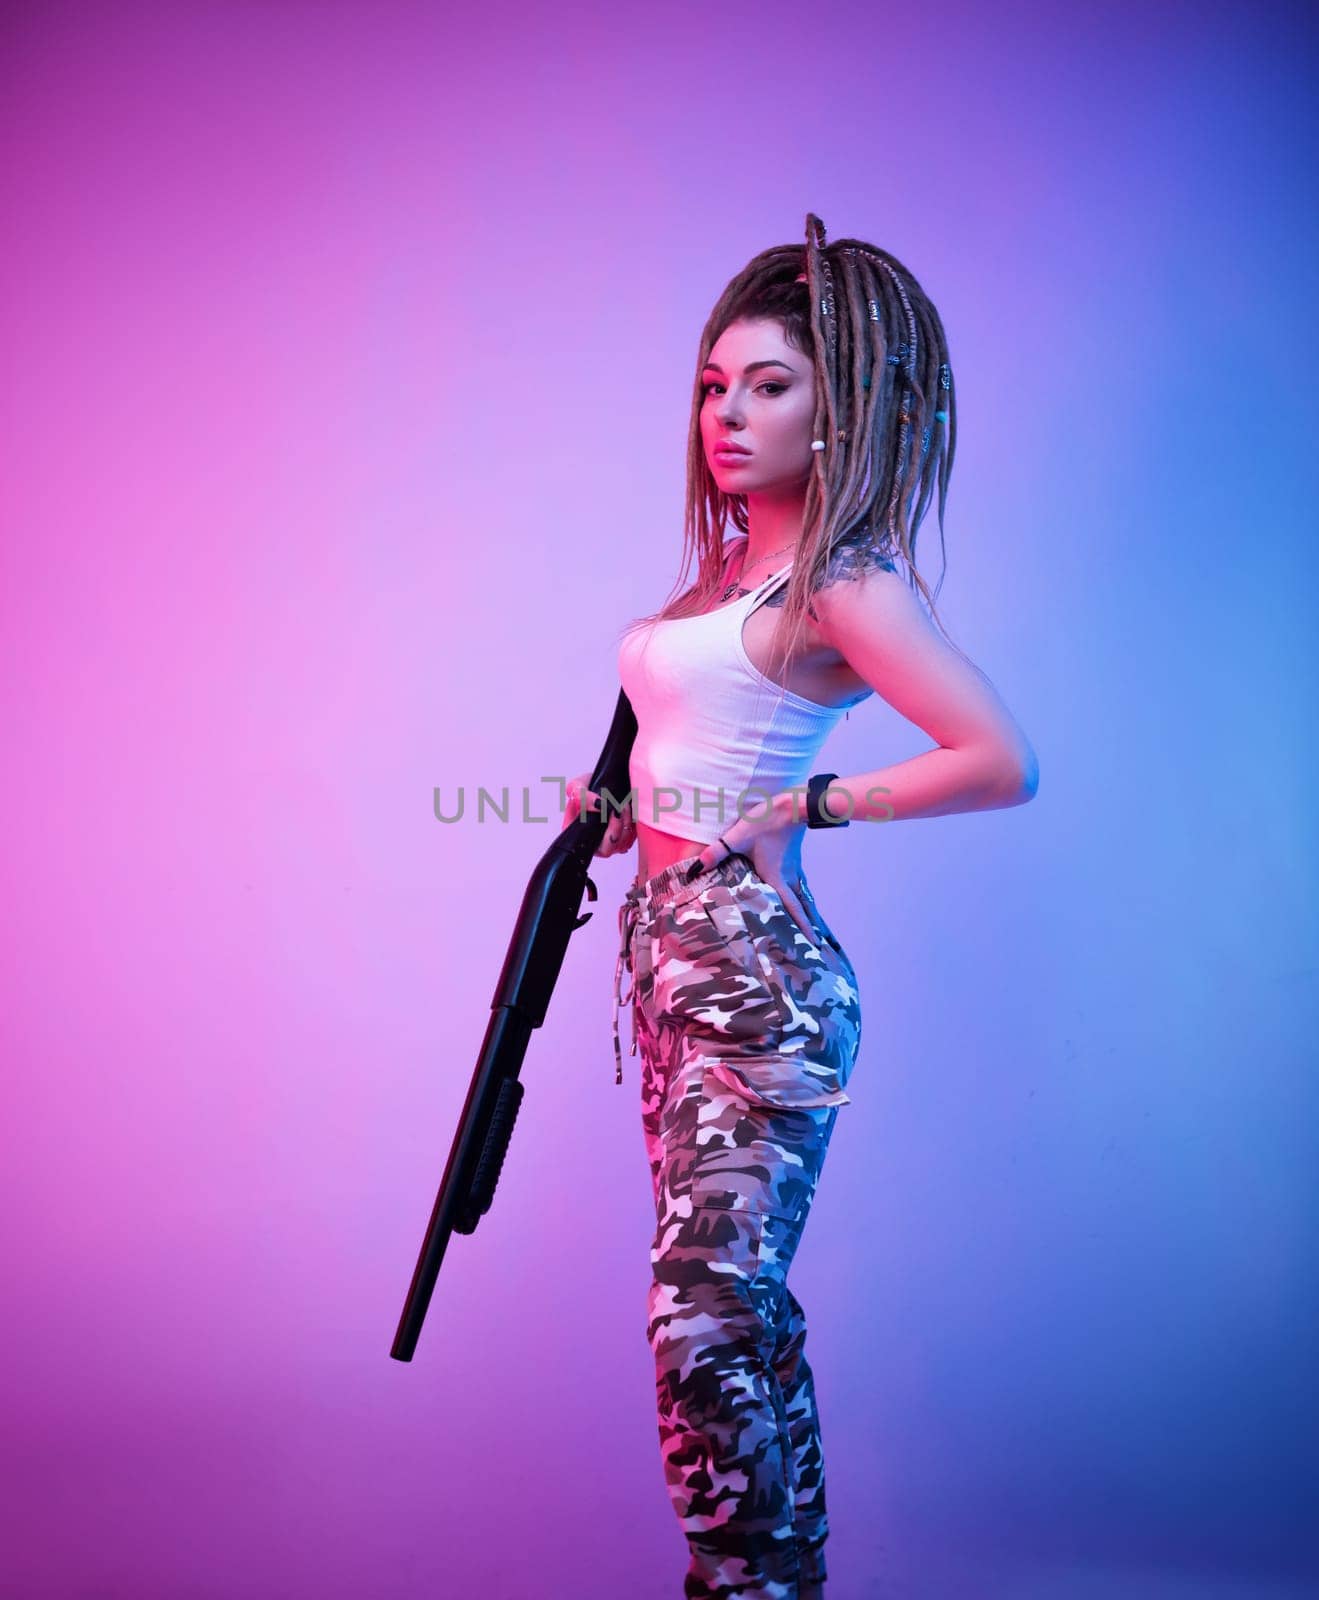 a cheeky girl with braided dreadlocks on her head in neon light with an gun in neon light